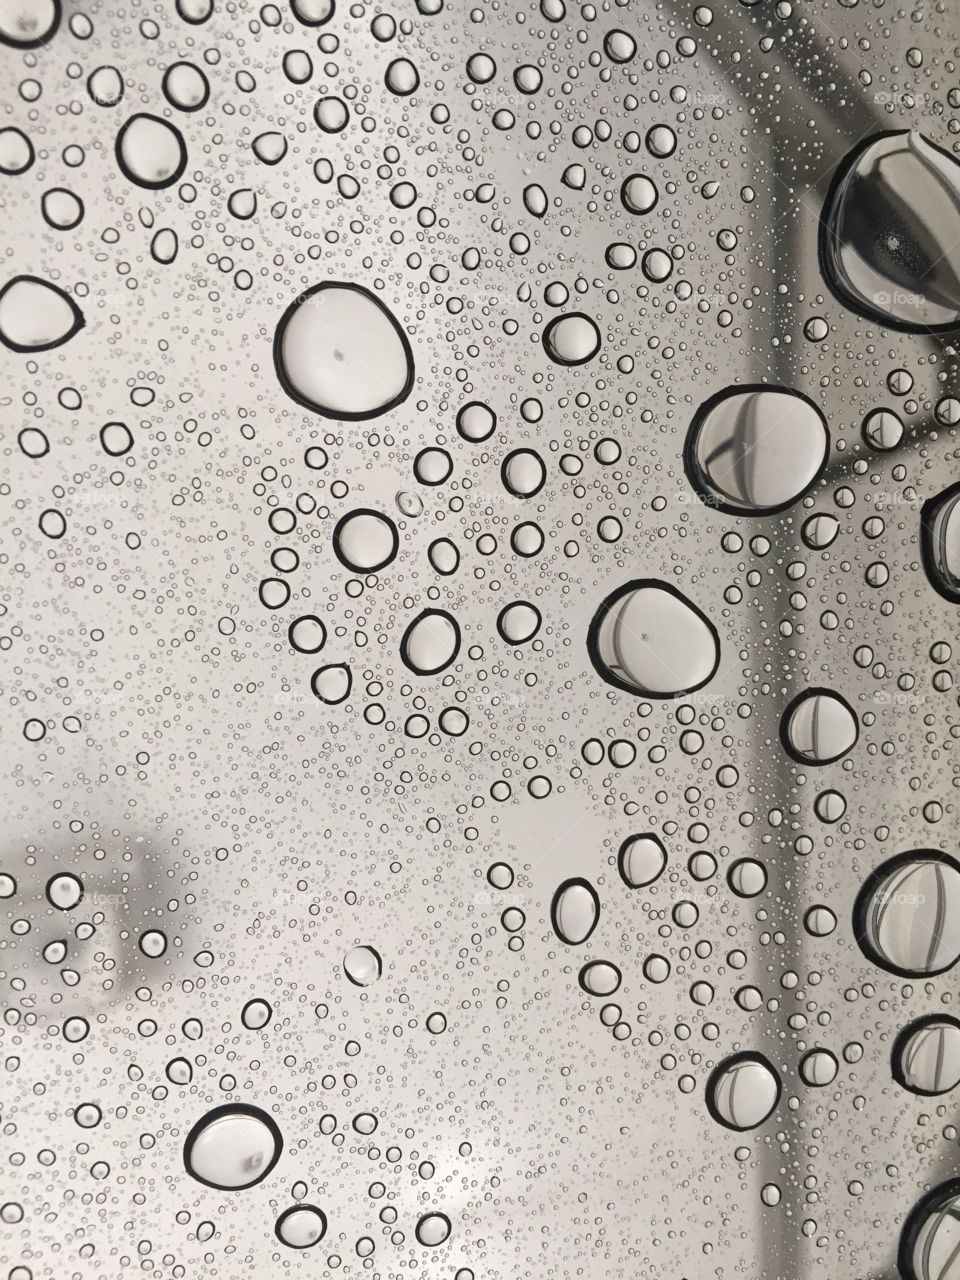 Water droplets 
